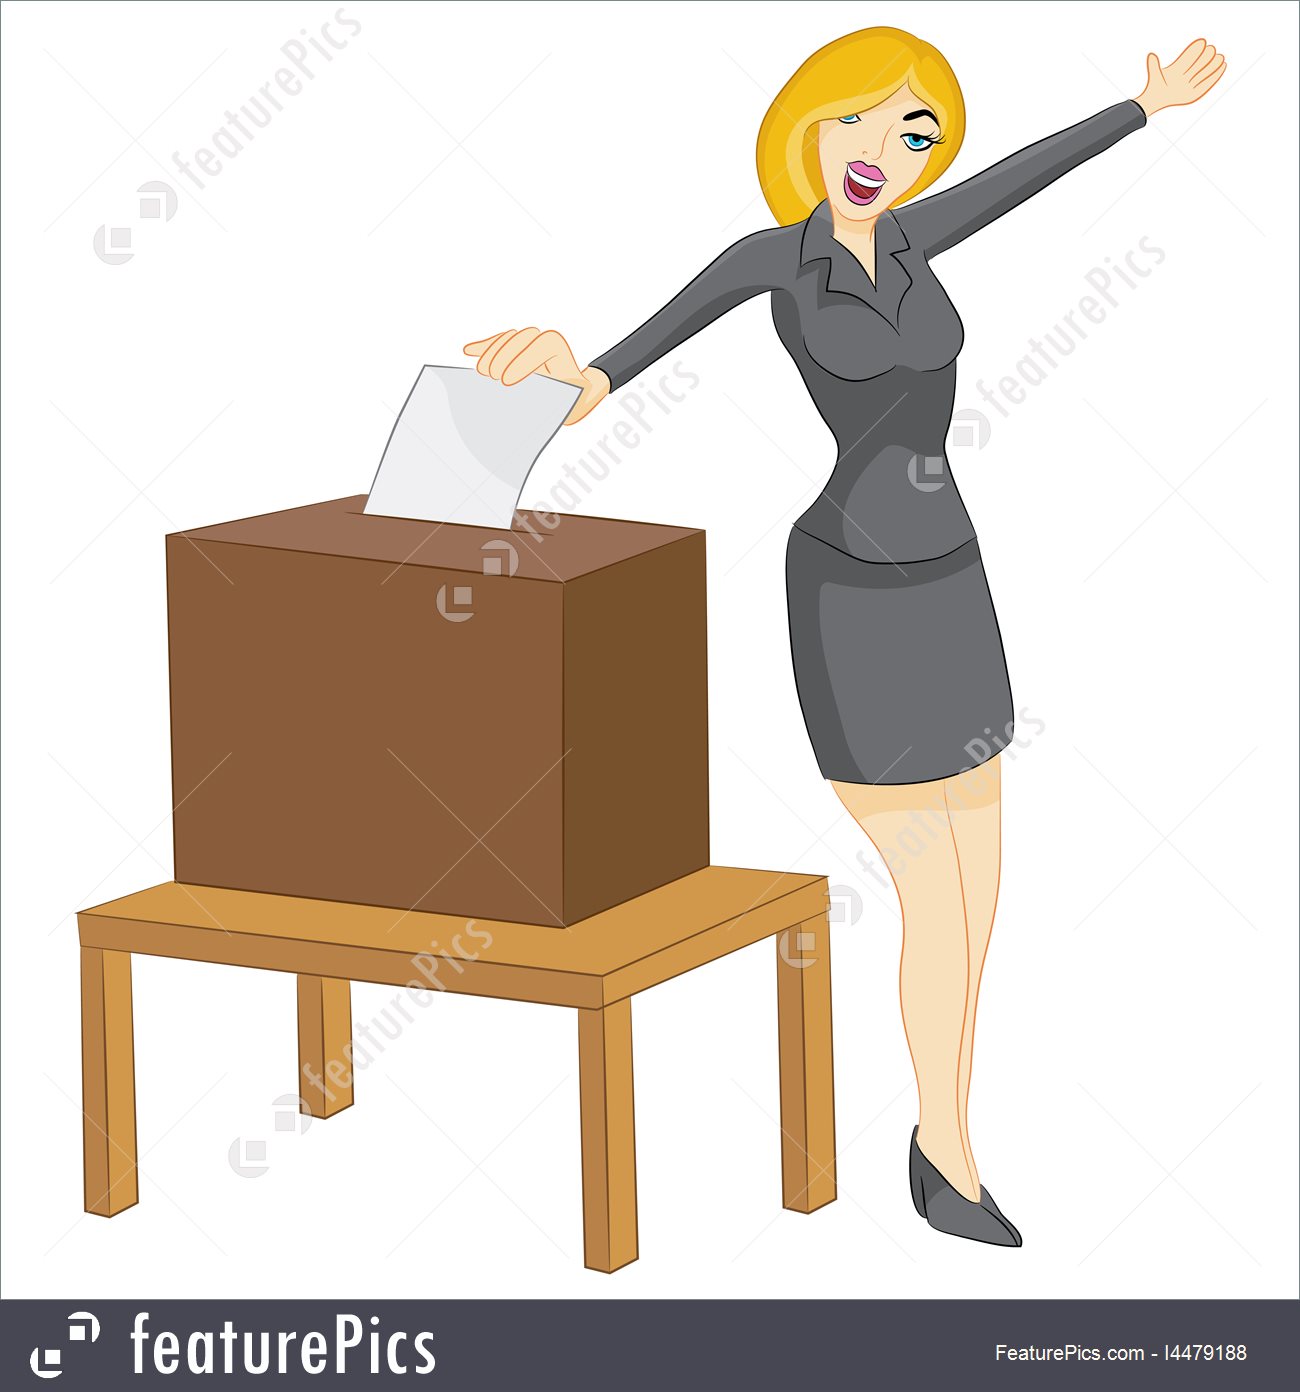 An image of a woman casting her vote at the ballot box.